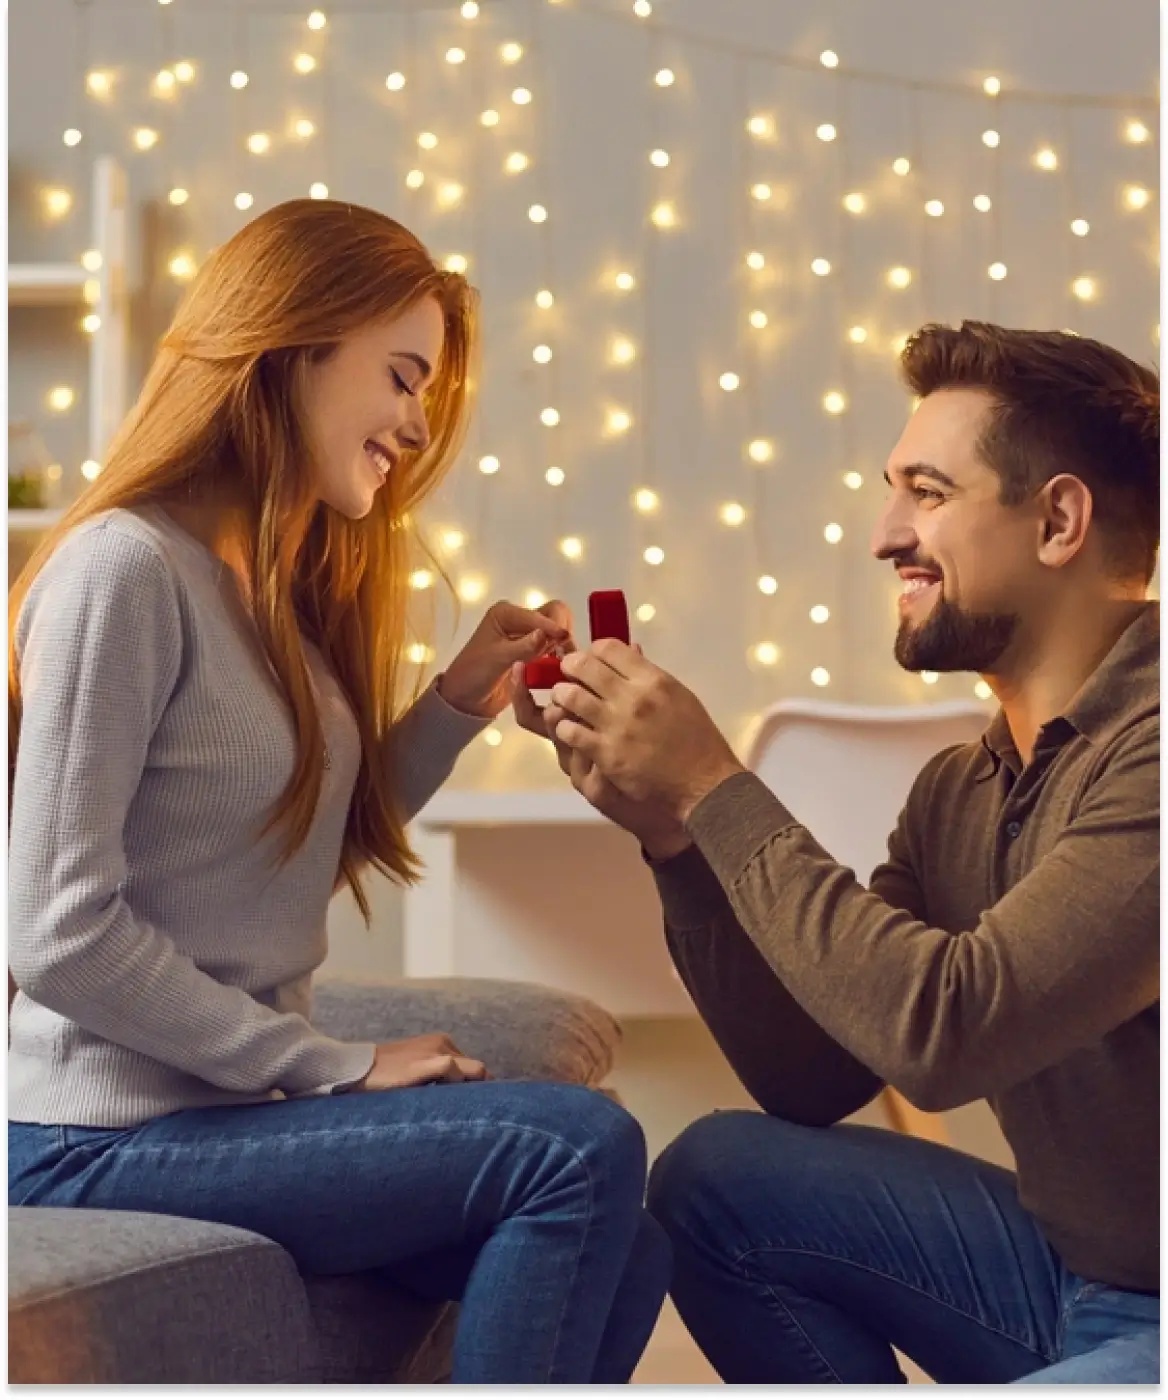 Pick From a Variety of Engagement Gift Ideas for Couples